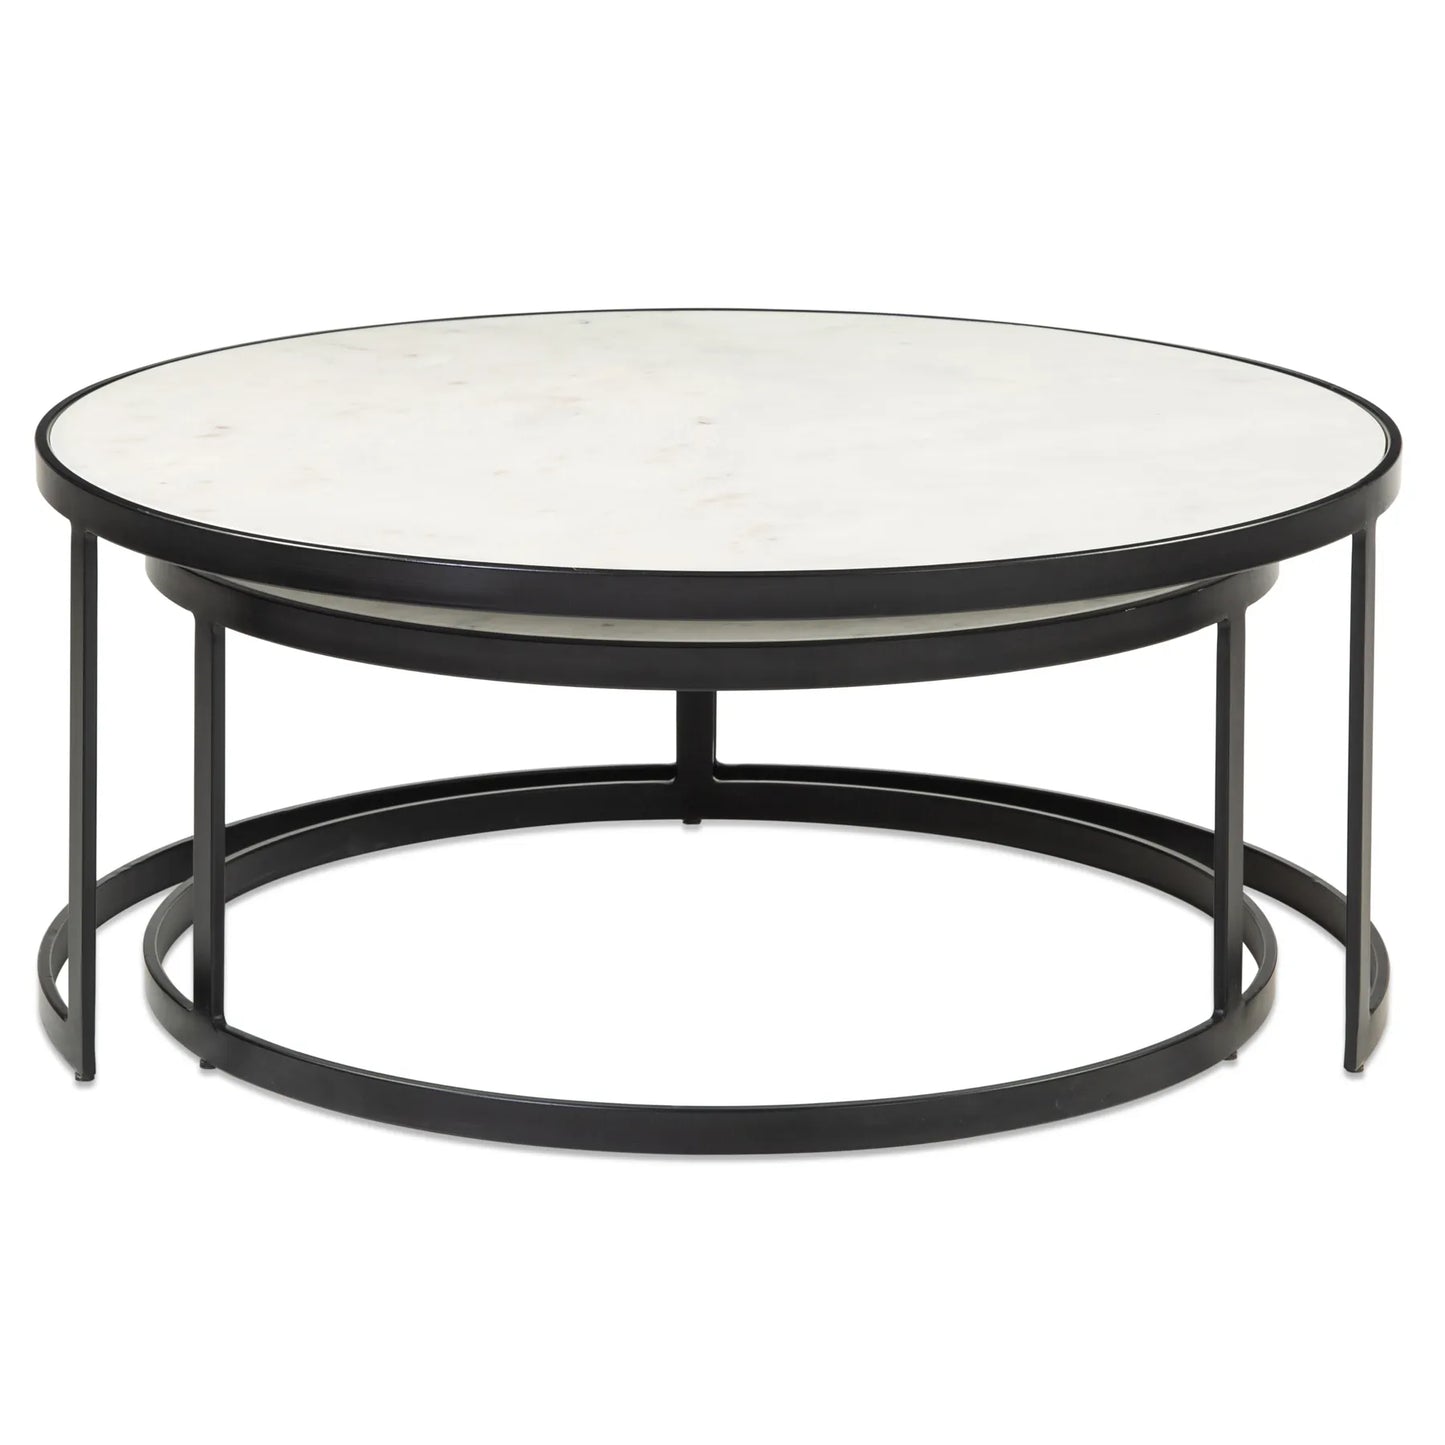 Buy Distinct Nesting Coffee Table Set - White Marble by Ode Design ...